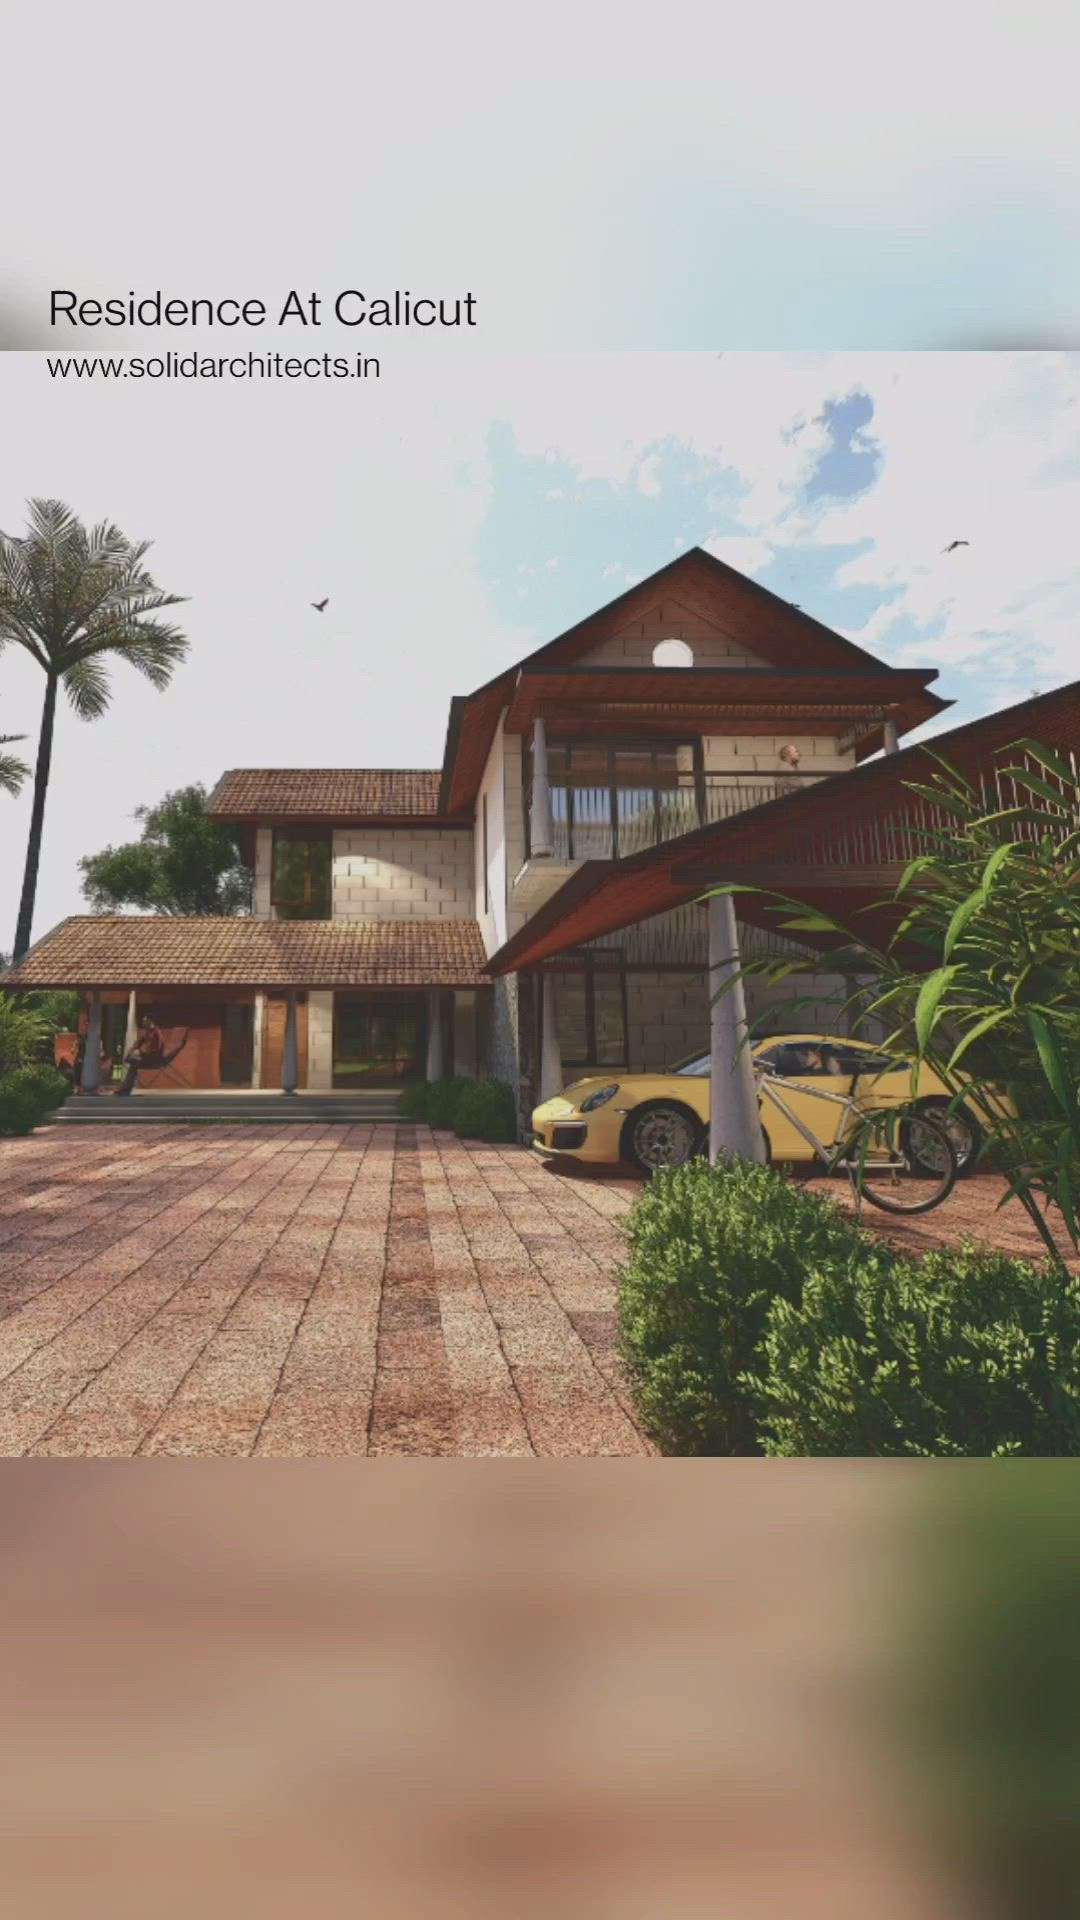 proposed residence at Calicut